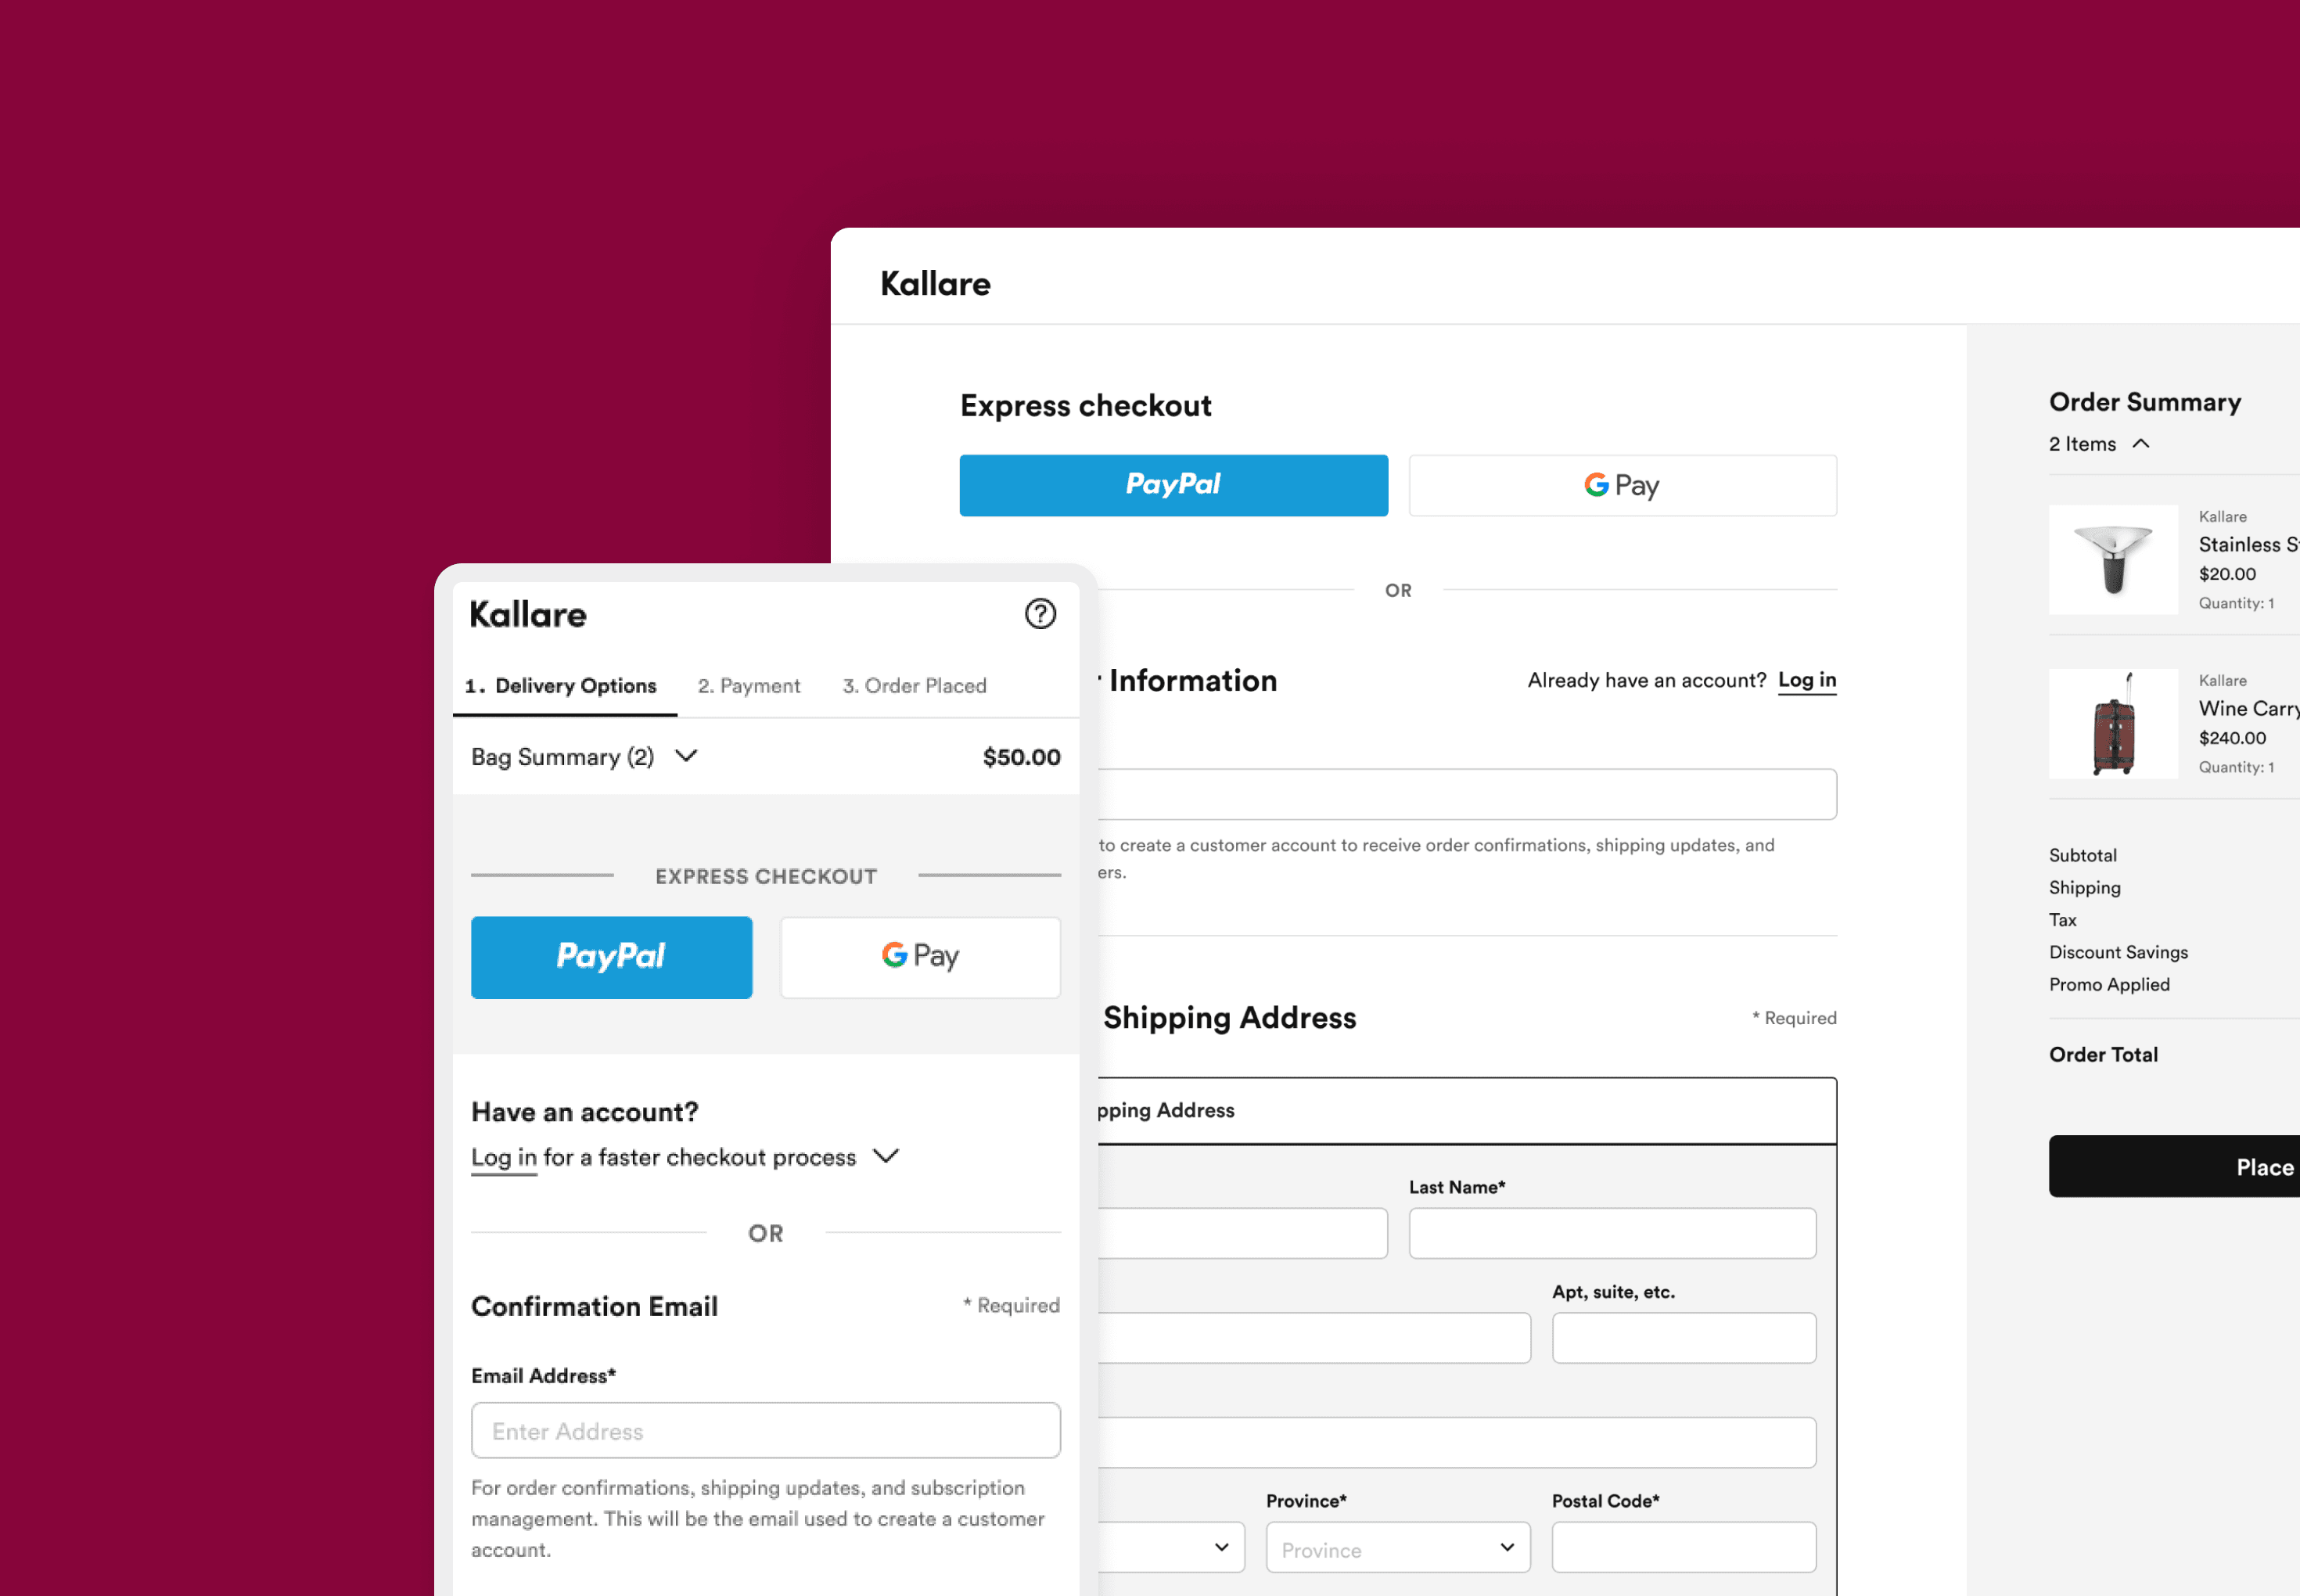 Sample of checkout and payment process using Orium's Bold Checkout Accelerator.